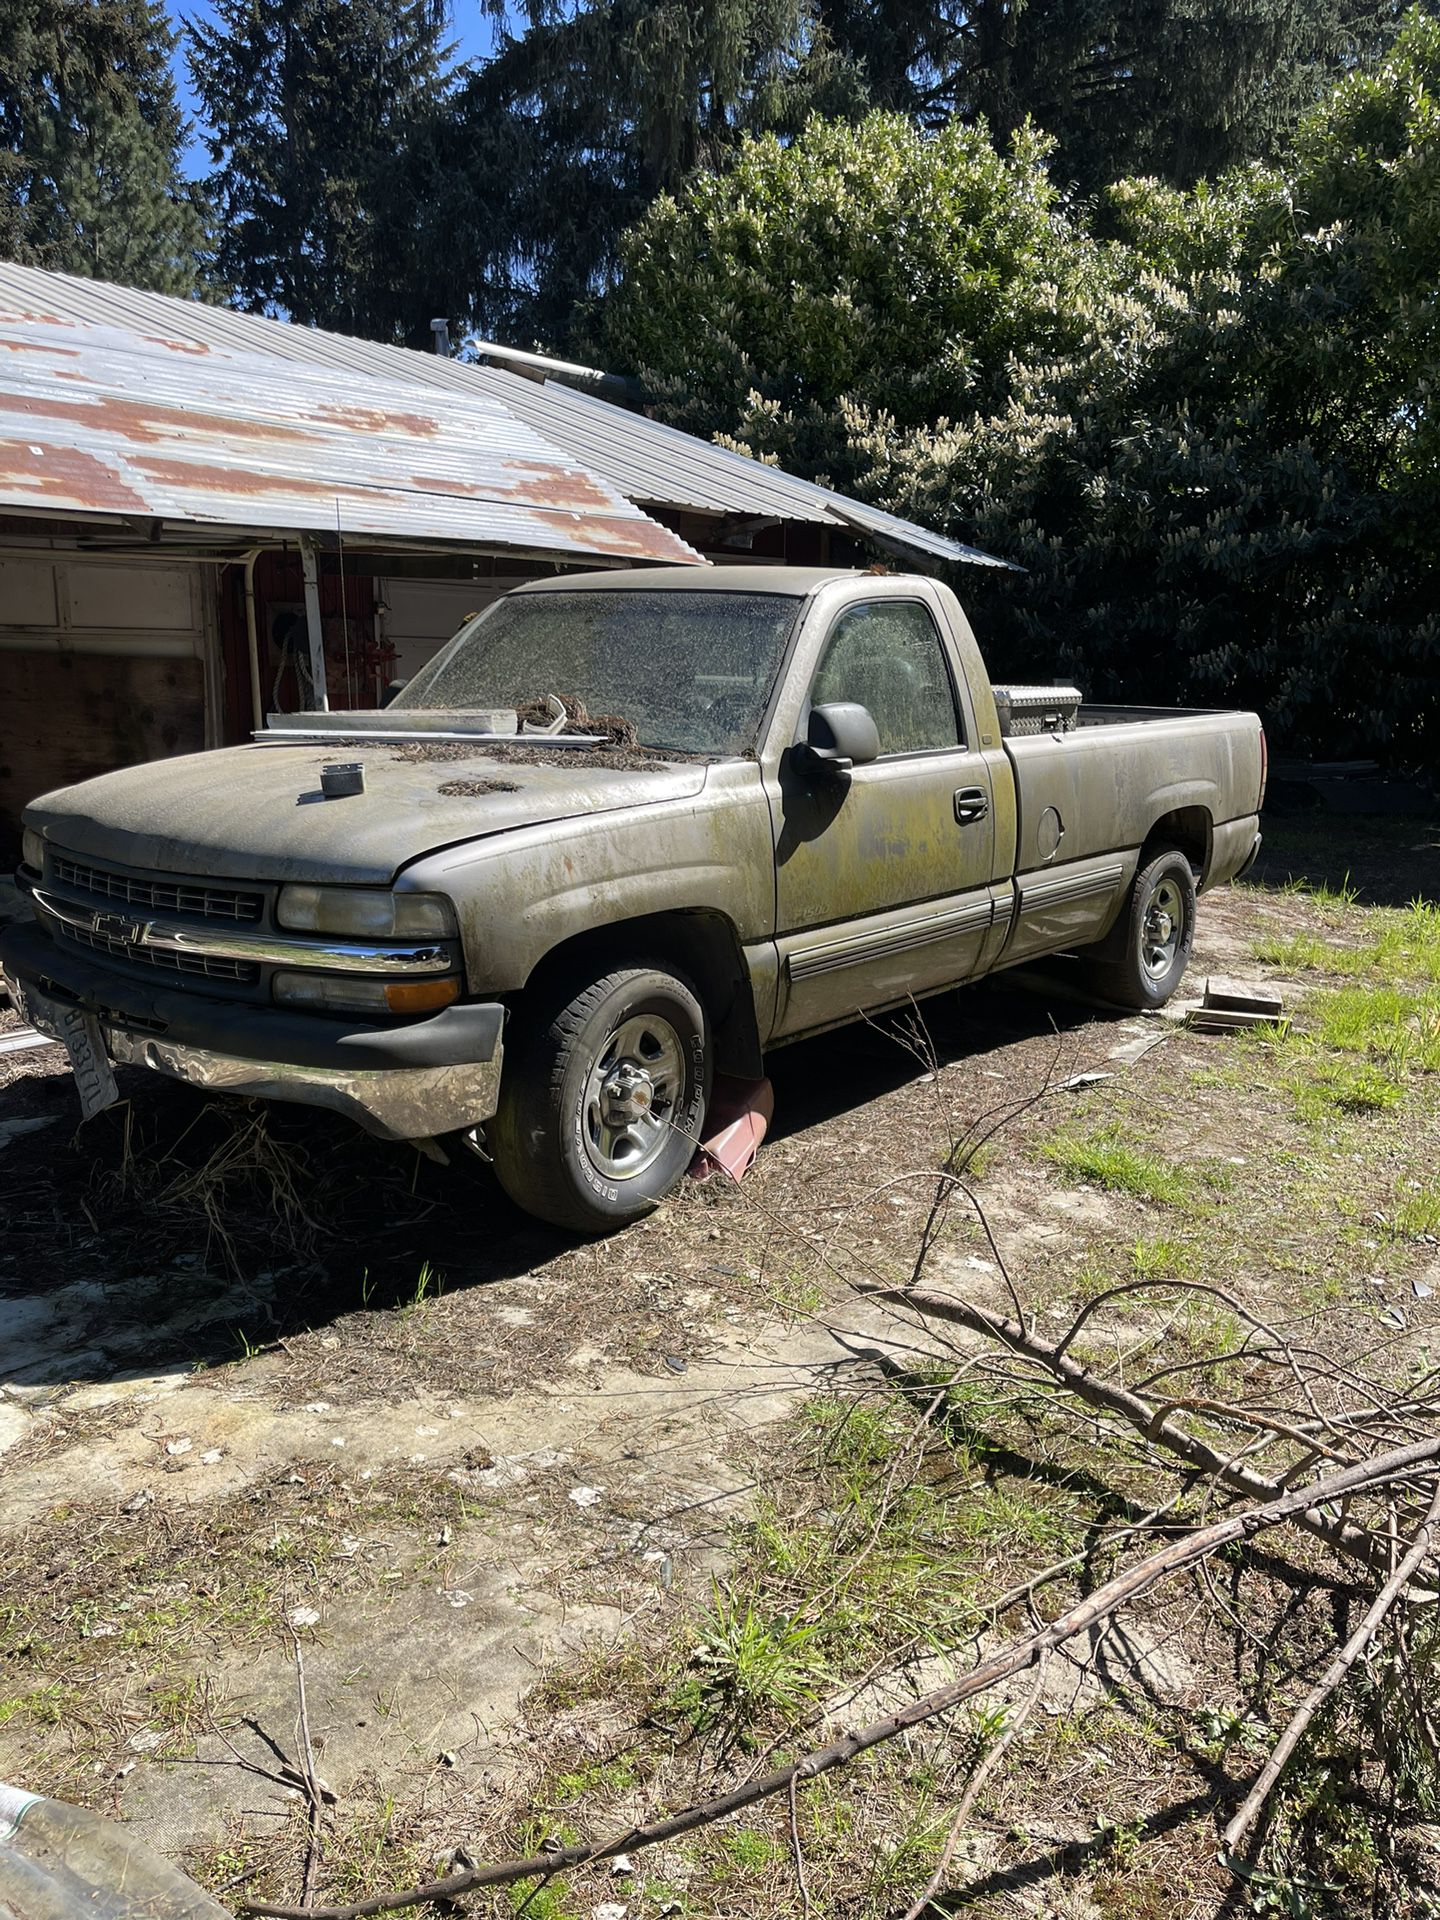 1999 Chevy 1500. Parting Out Or Sell. 